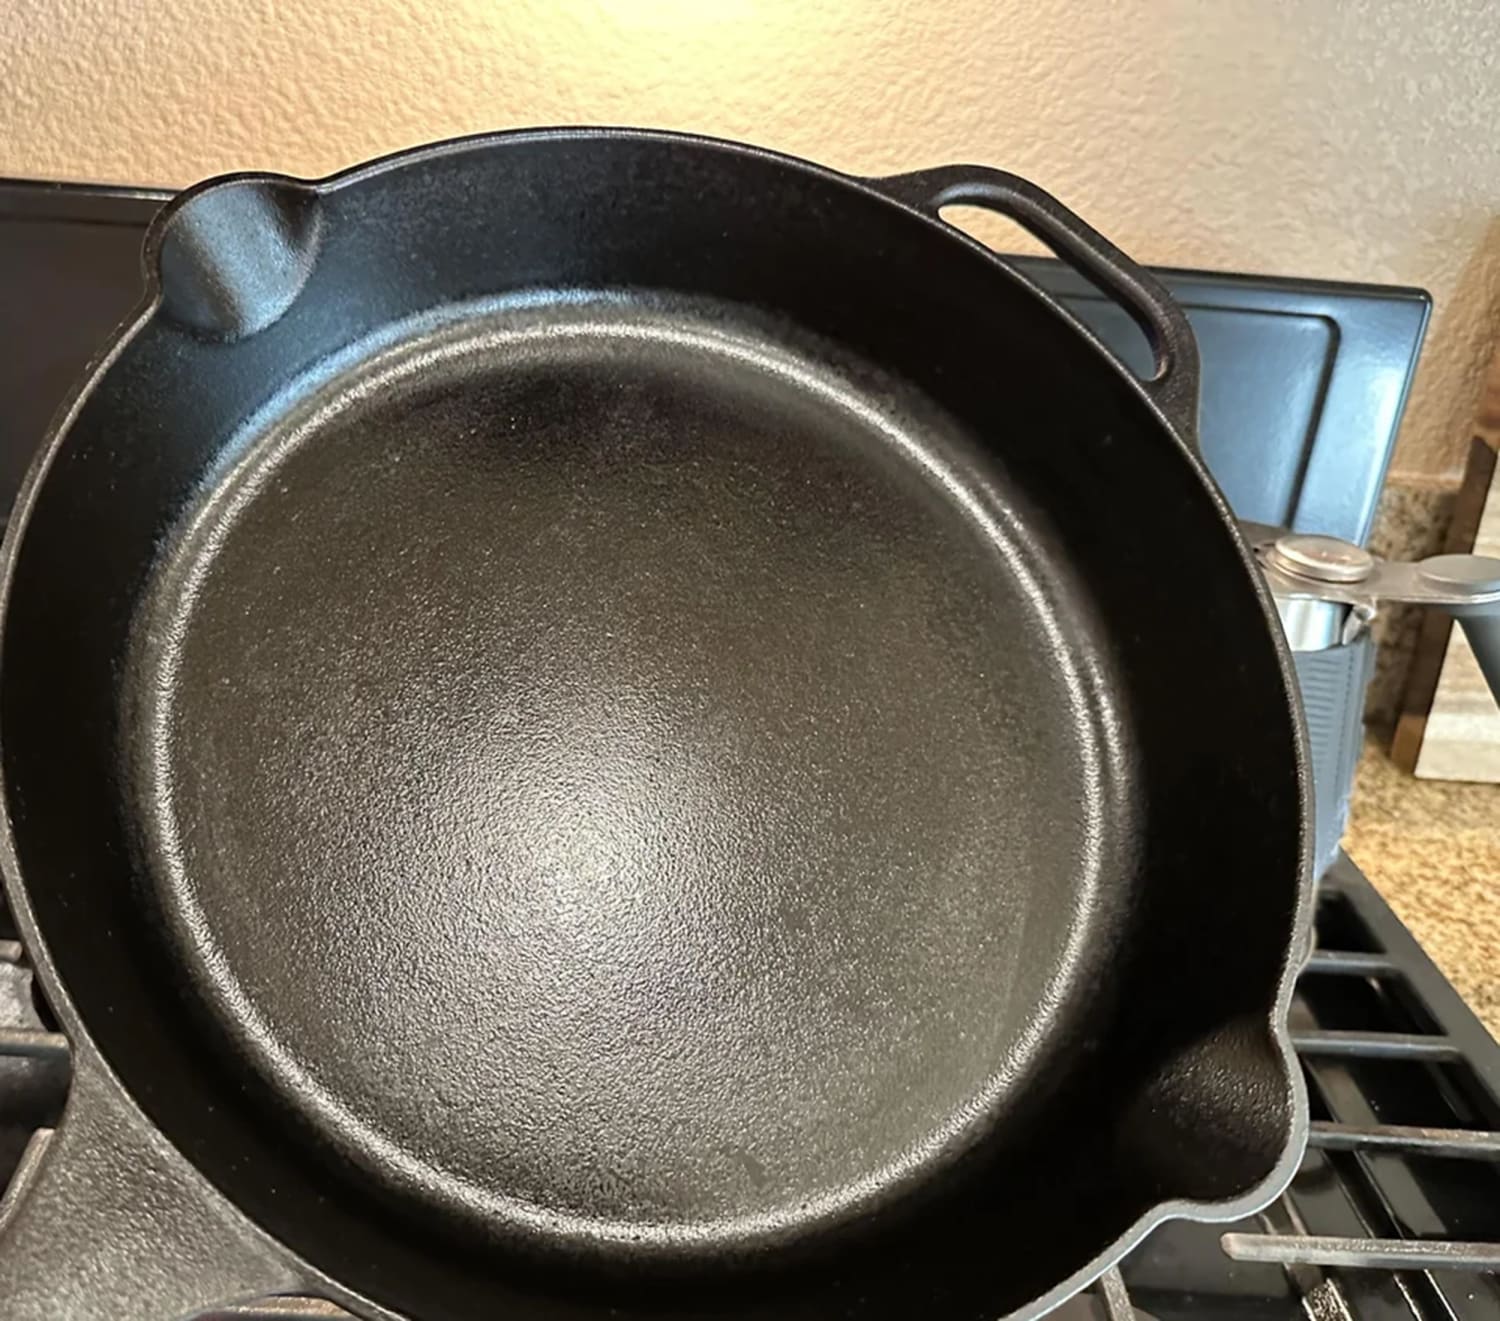 Is this good so season with? : r/castiron